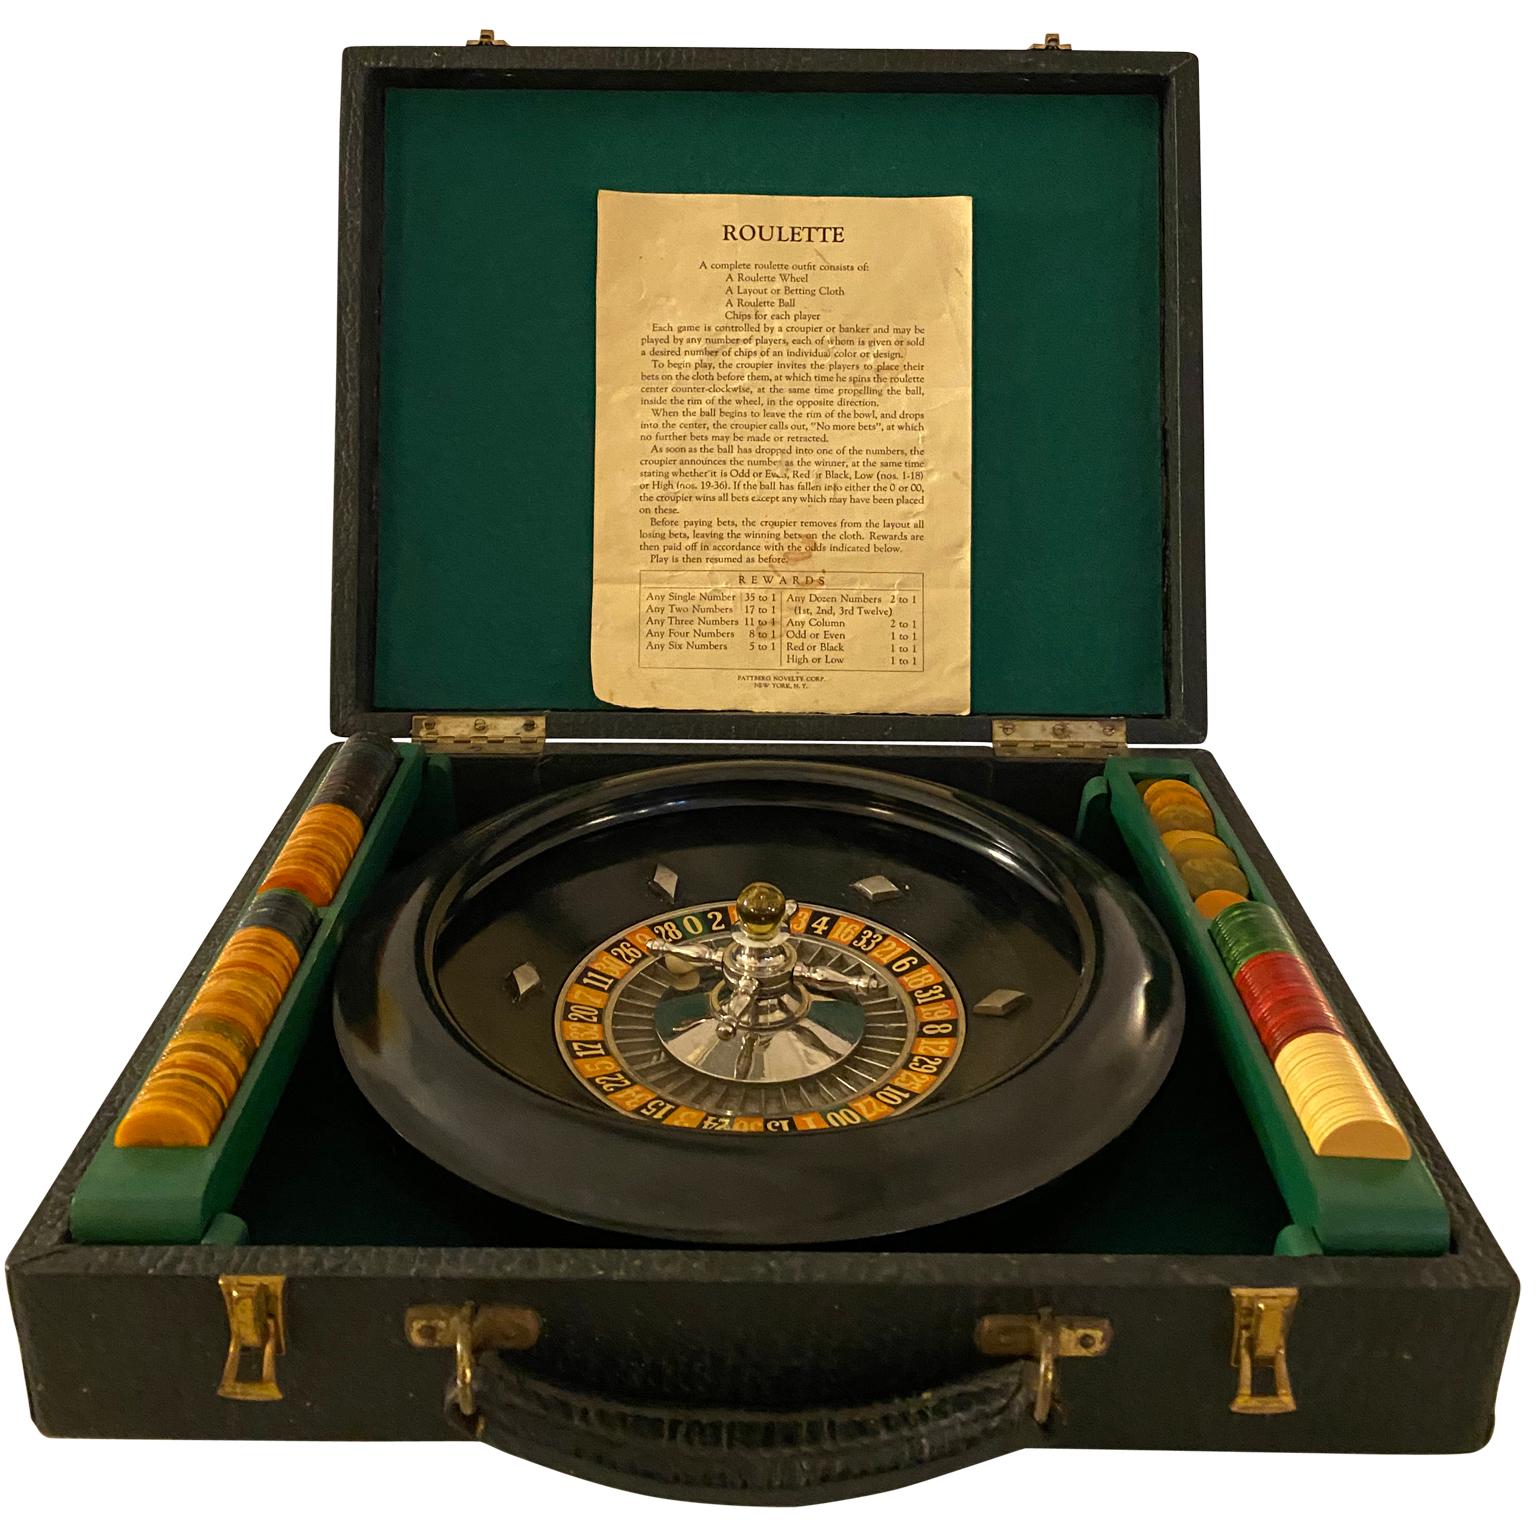 Portable bakelite roulette game set in leather case. The set is complete with green croupier viser, original marble and game pieces, bakelite betting pieces, as well as the original rules list. Carrying case is made of leather and has brass locks.